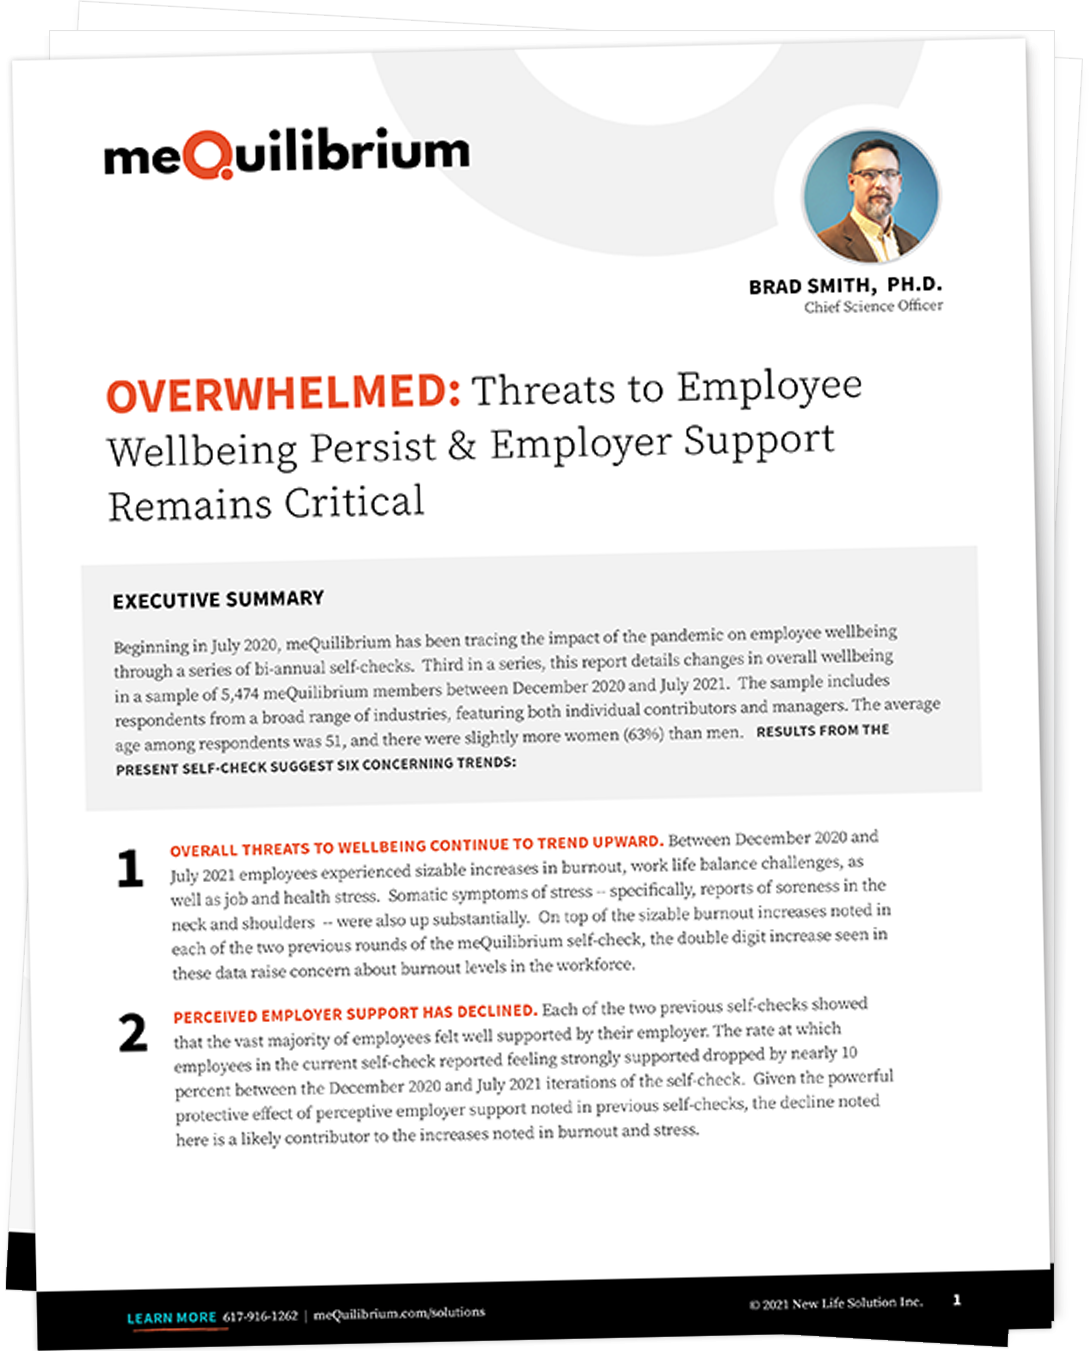 Overwhelmed: Threats to Employee Wellbeing Persist & Employer Support Remains Critical